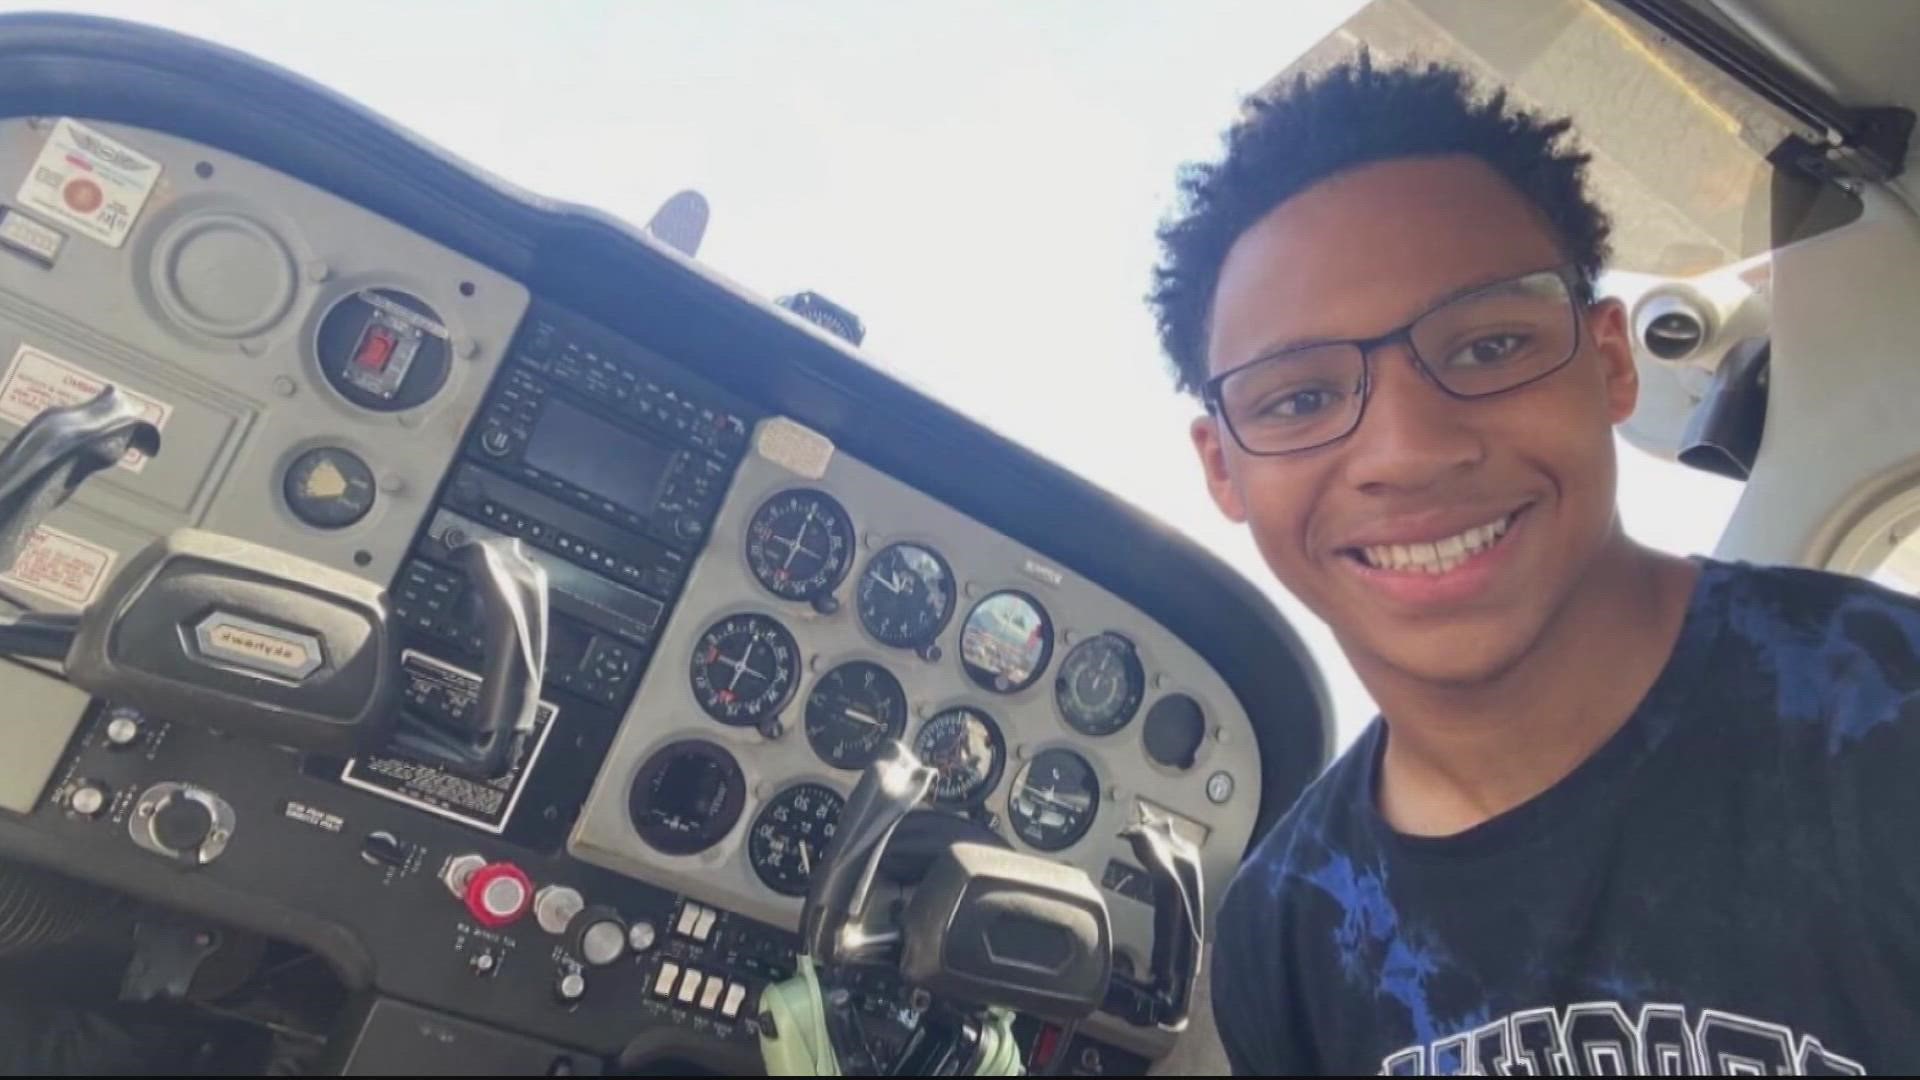 Flying planes is his passion, and he's now one of the youngest pilots in the country.